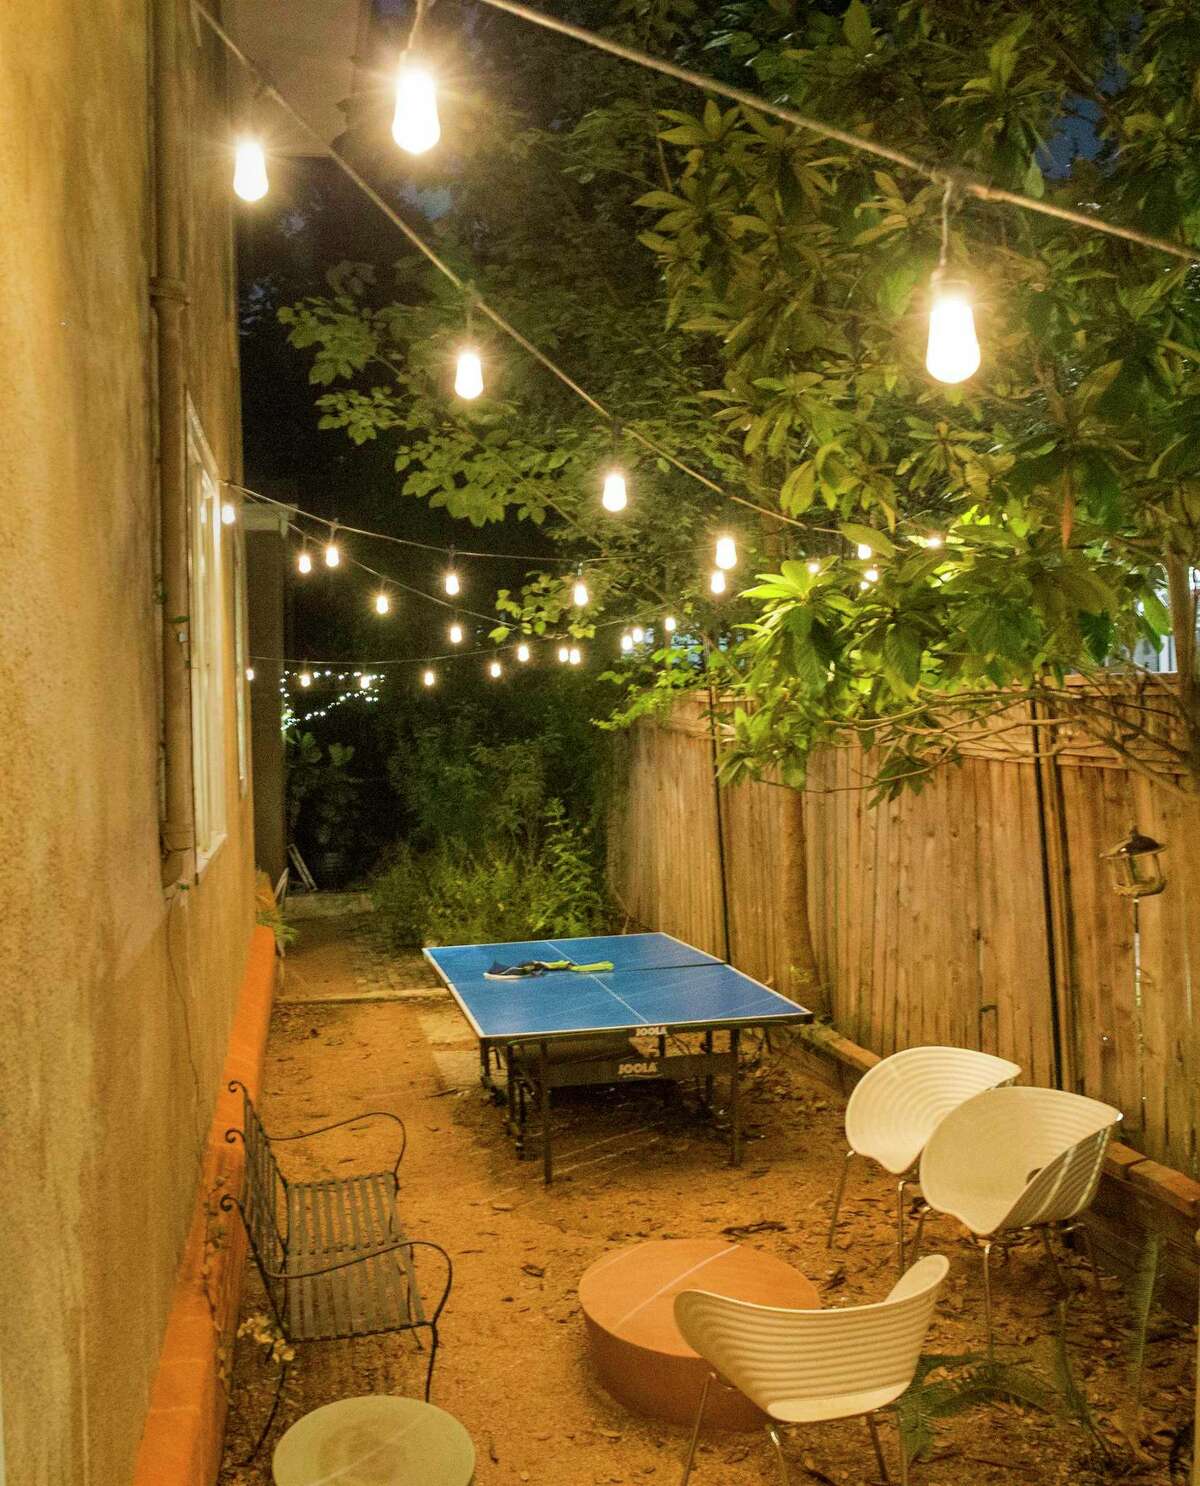 LIGHTING IS EVERYTHING Hanging lights are an easy way to spruce up any outdoor space and will set a more romantic and fun tone.